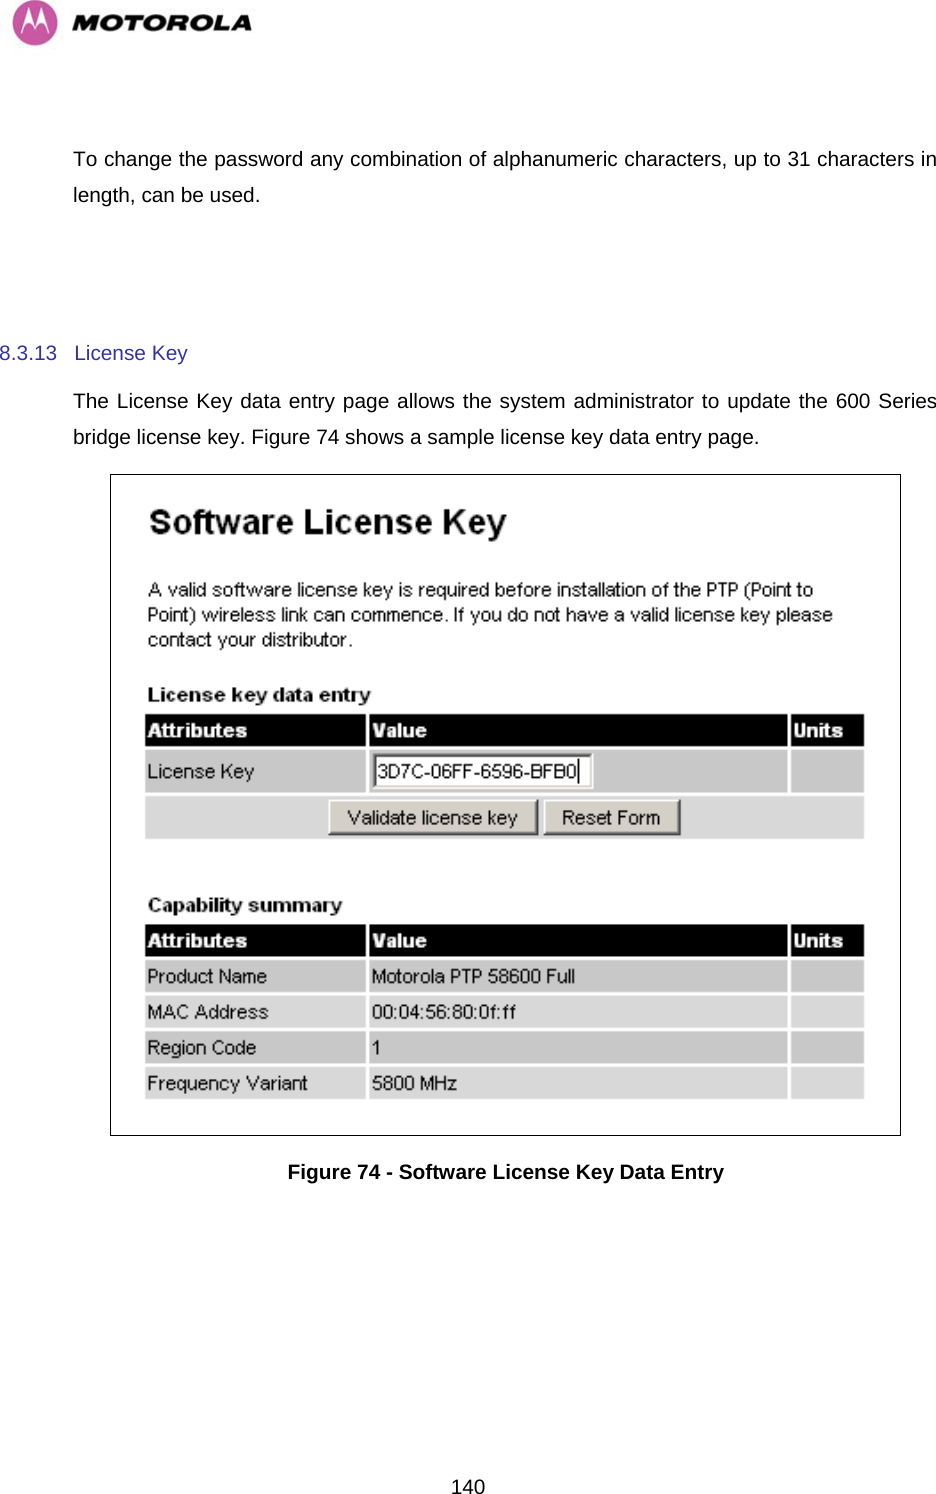   140 To change the password any combination of alphanumeric characters, up to 31 characters in length, can be used.   8.3.13 License Key The License Key data entry page allows the system administrator to update the 600 Series bridge license key. Figure 74 shows a sample license key data entry page.  Figure 74 - Software License Key Data Entry 